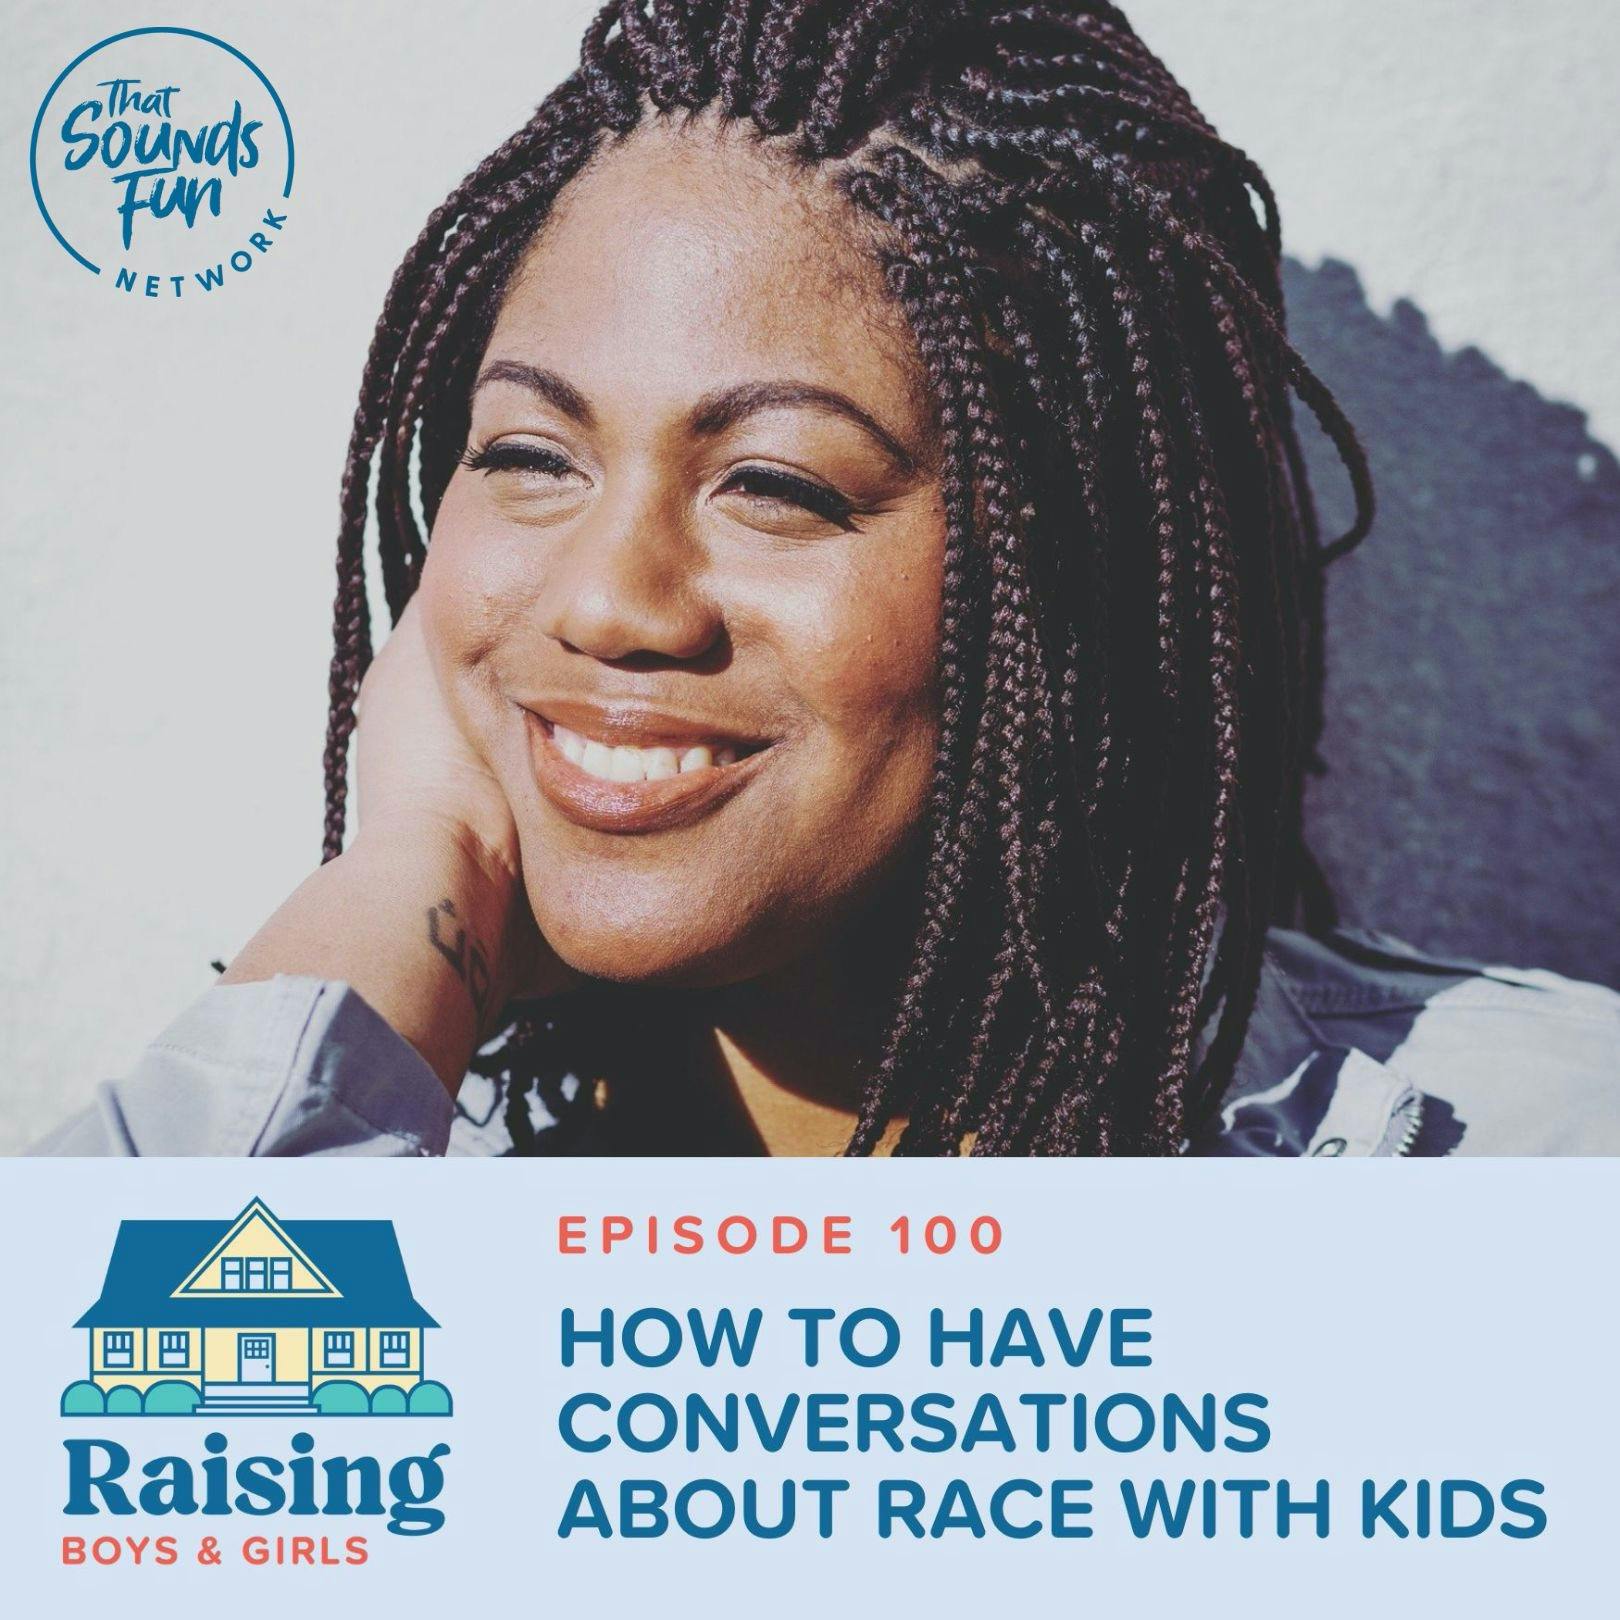 Episode 100: How to Have Conversations About Race with Kids